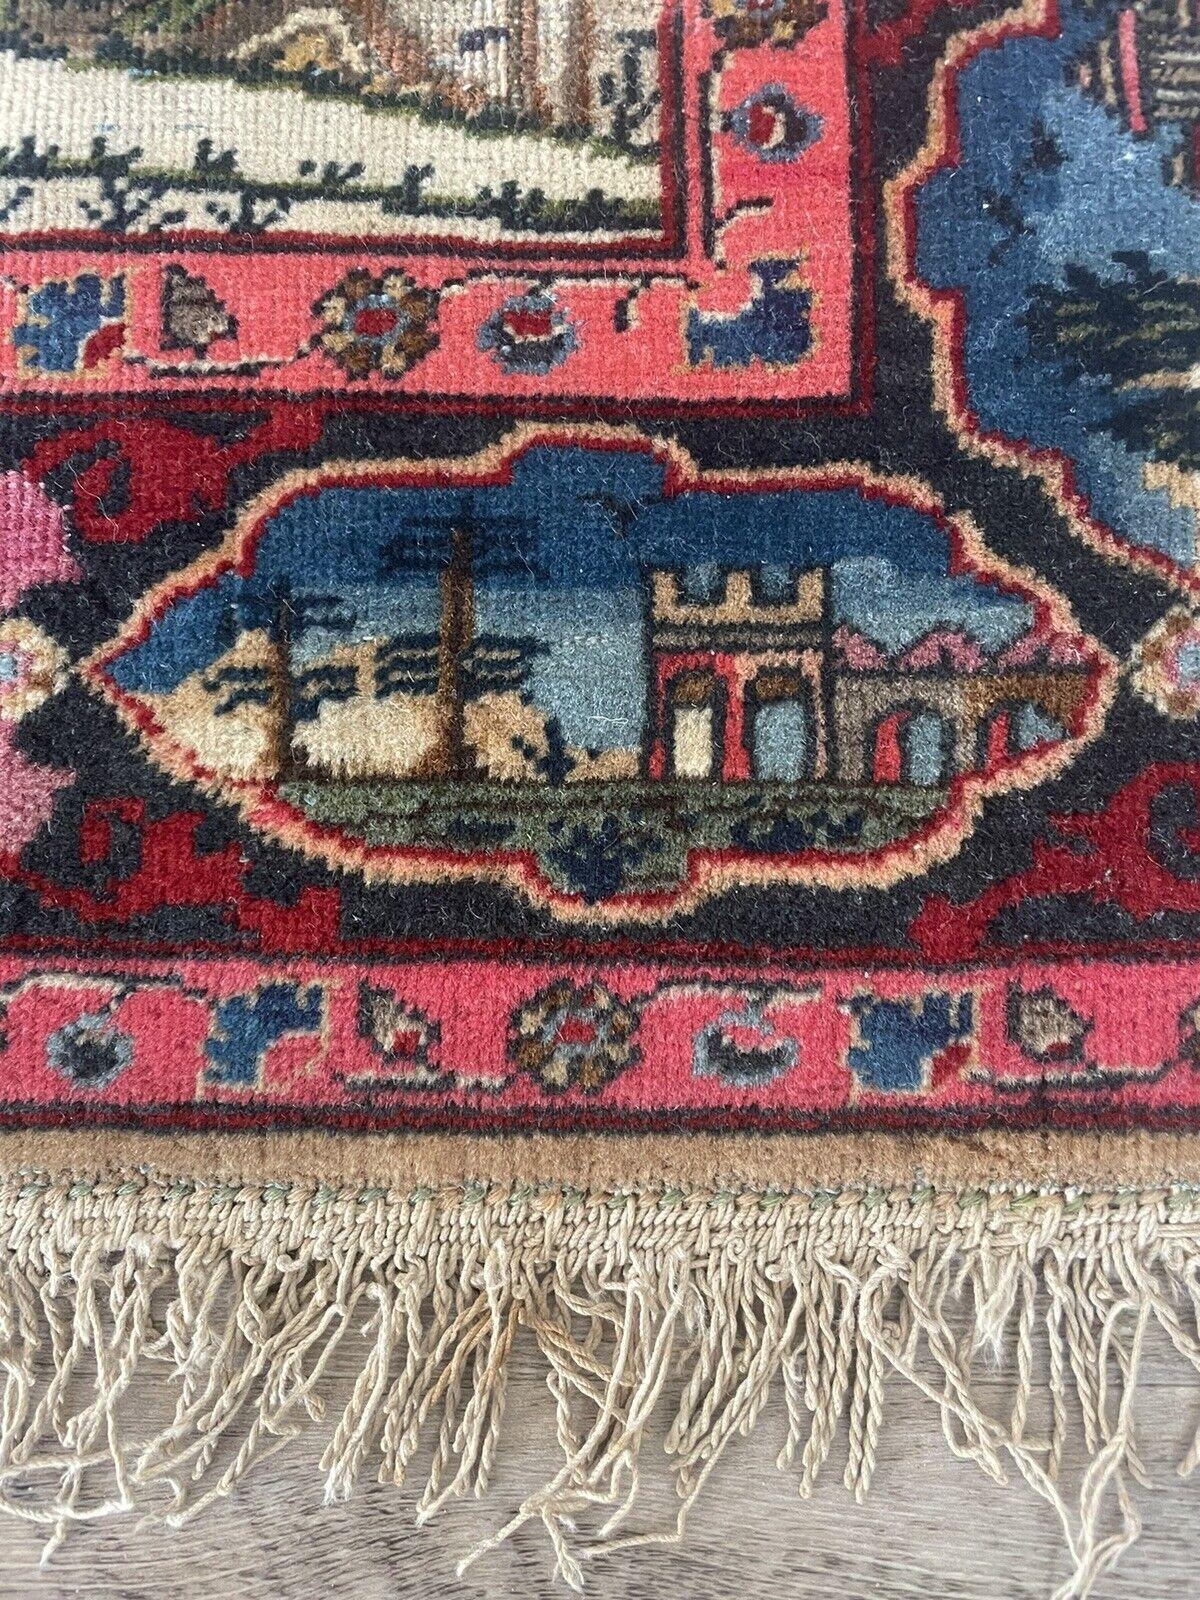 Late 19th Century Handmade Antique Persian Kashan Collectible Rug 1.6' x 2.4, 1880s - 1N09 For Sale